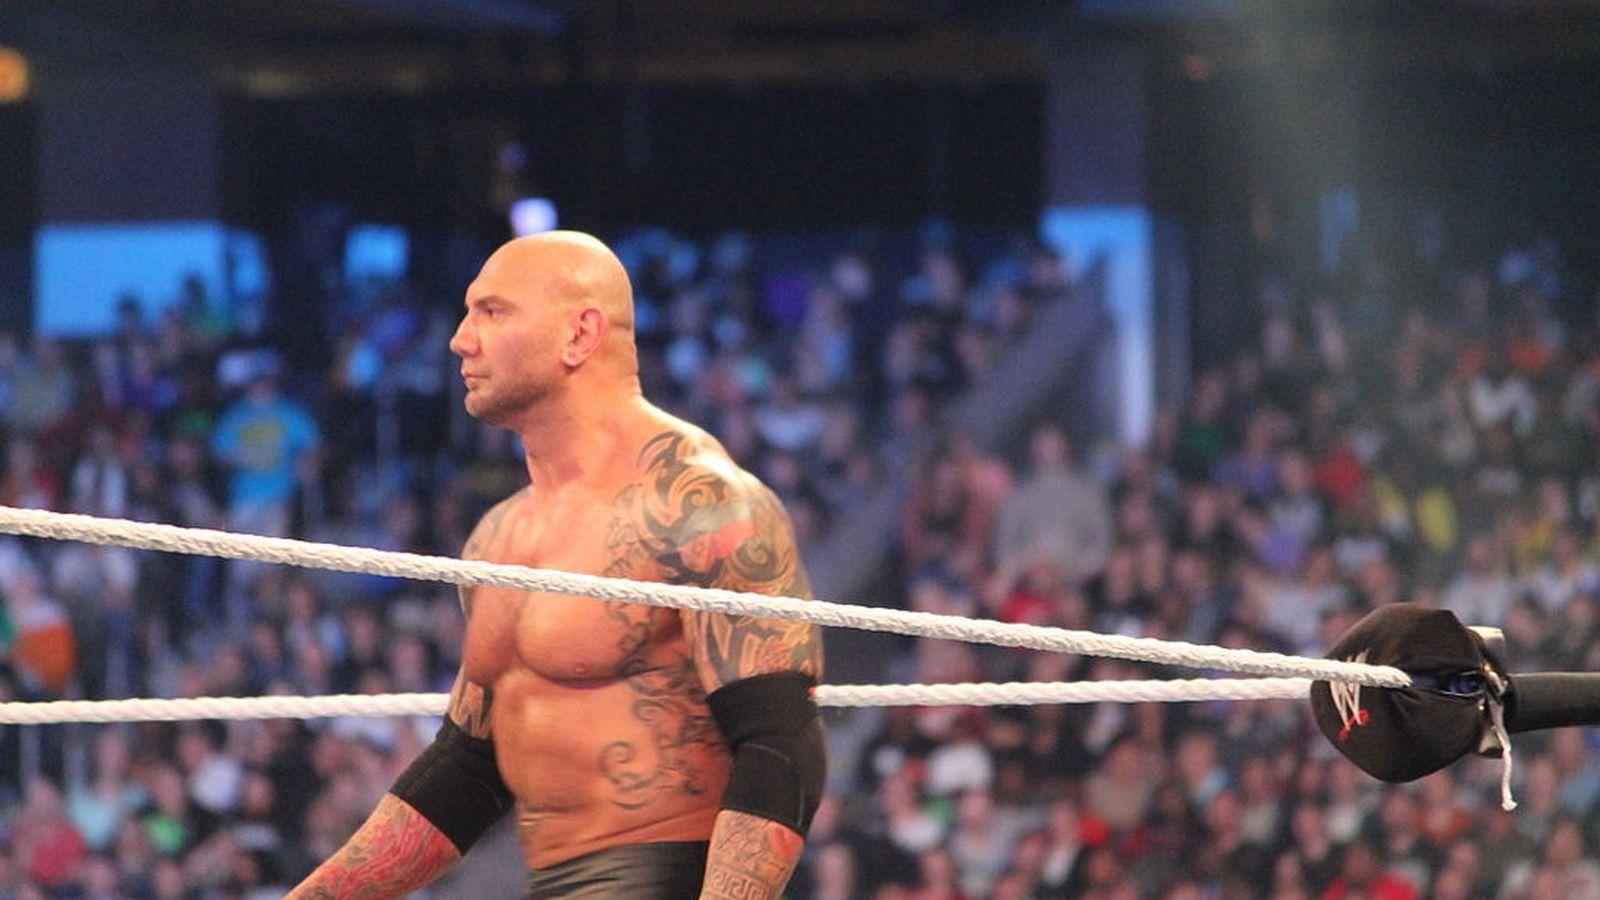 Batista not sure how much time he has left in wrestling, talks